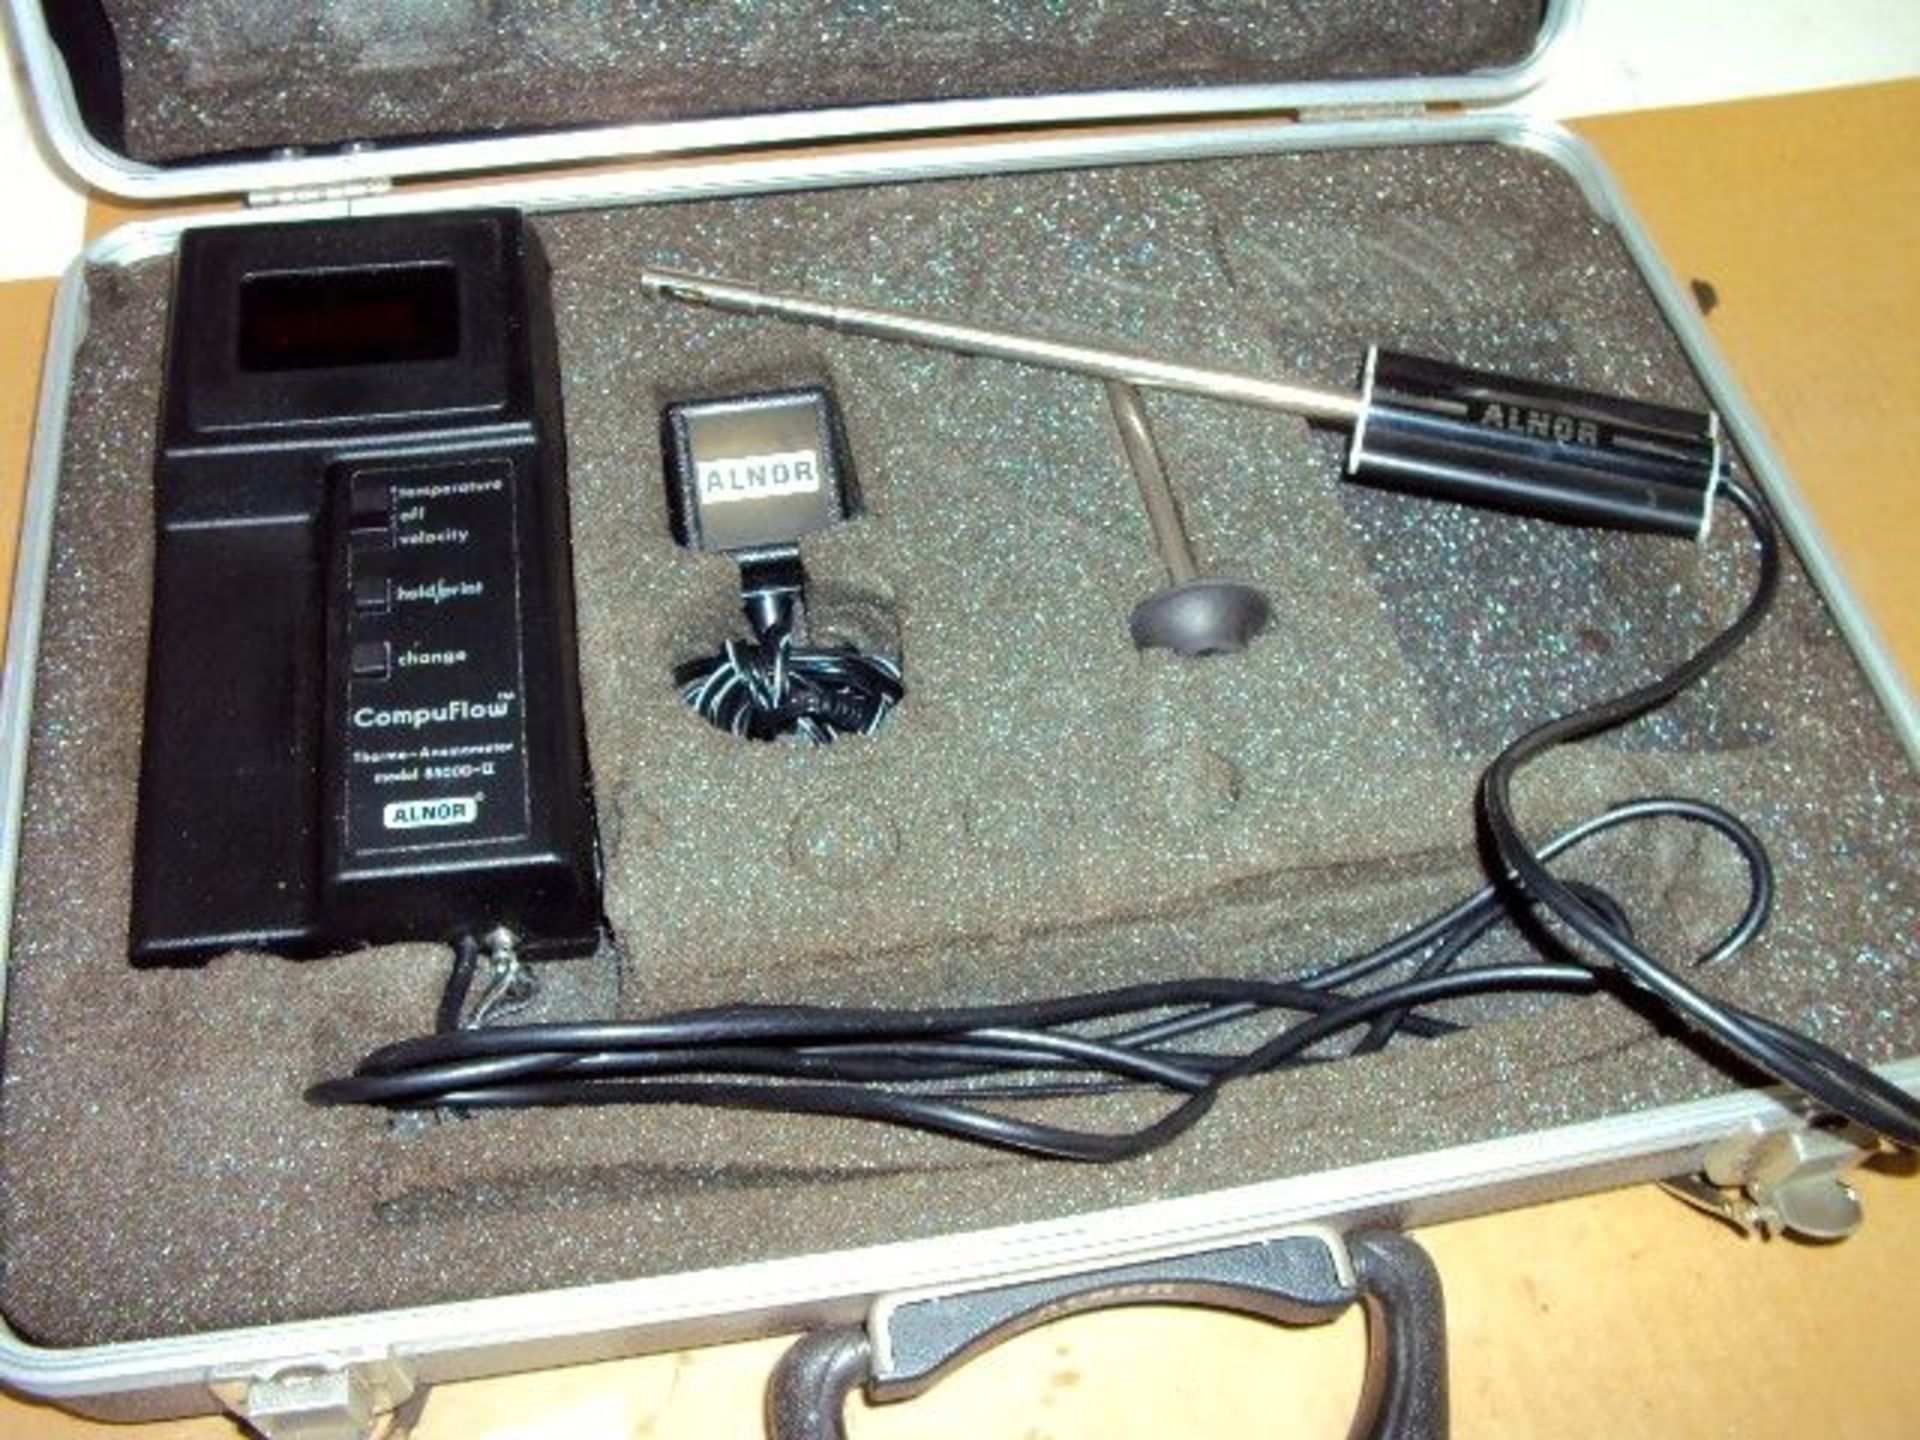 Alnor Model 8500D-II Compuflow Thermo Anemometer w/Charger & Wand in Padded Case - No Batteries /248 - Image 2 of 5